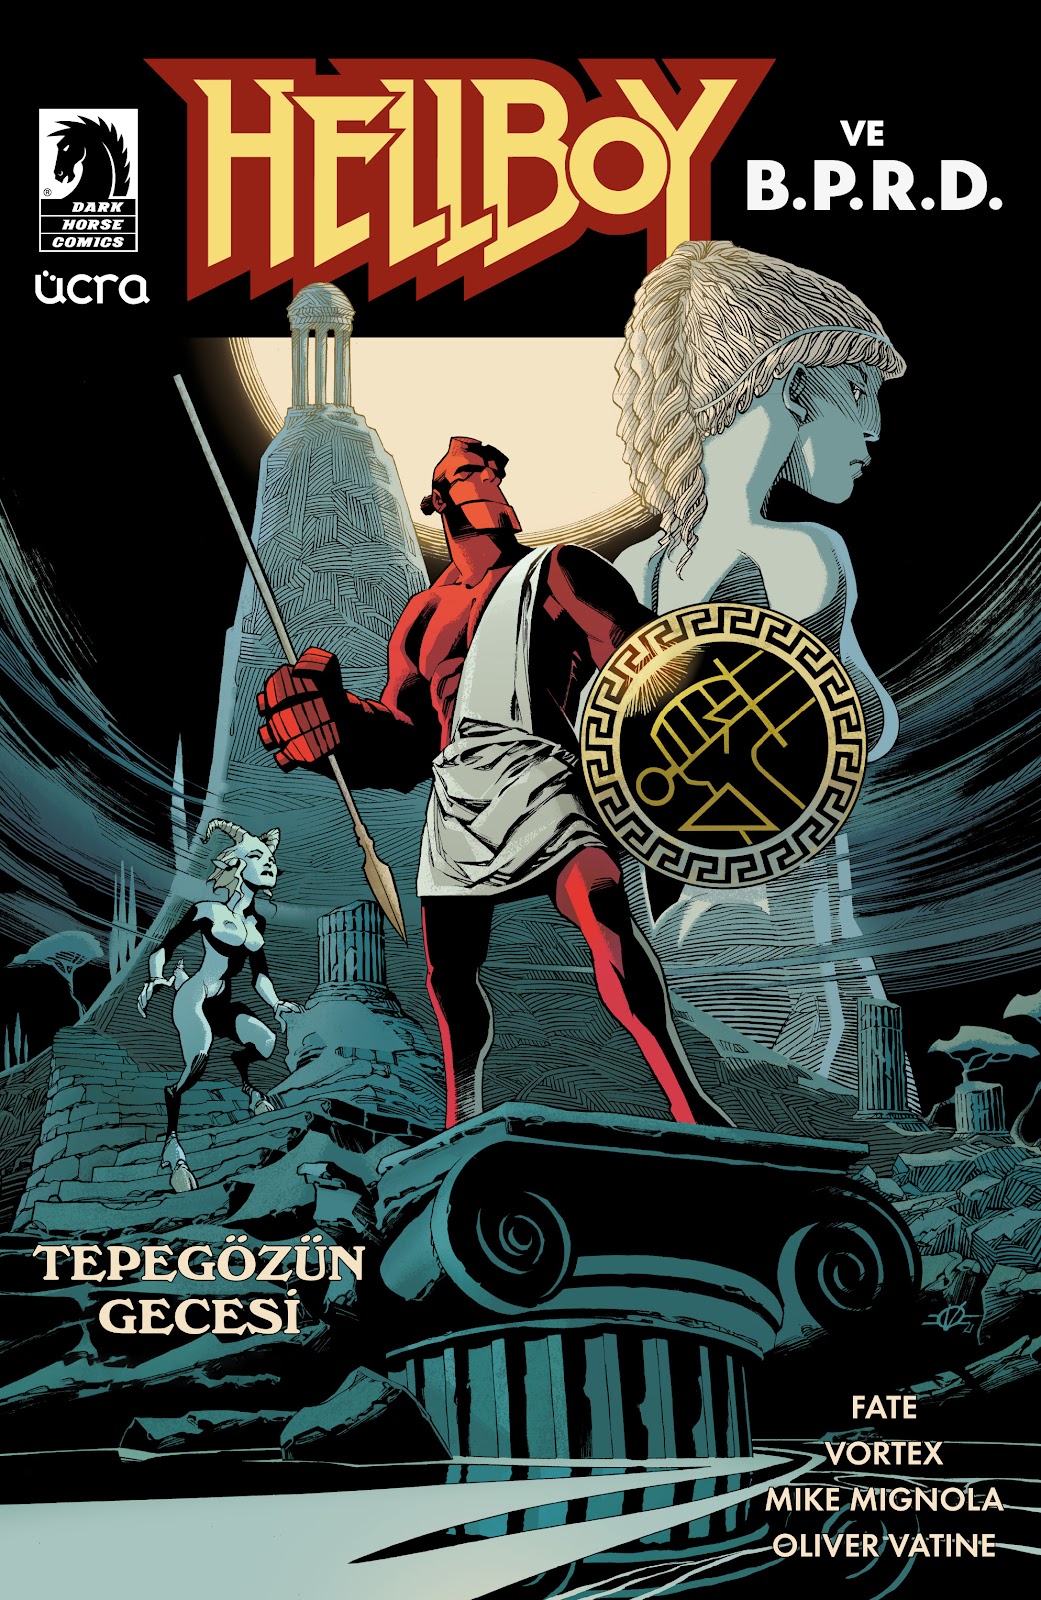 Hellboy%20and%20the%20B.P.R.D.%20-%20Night%20of%20the%20Cyclops-000.jpg